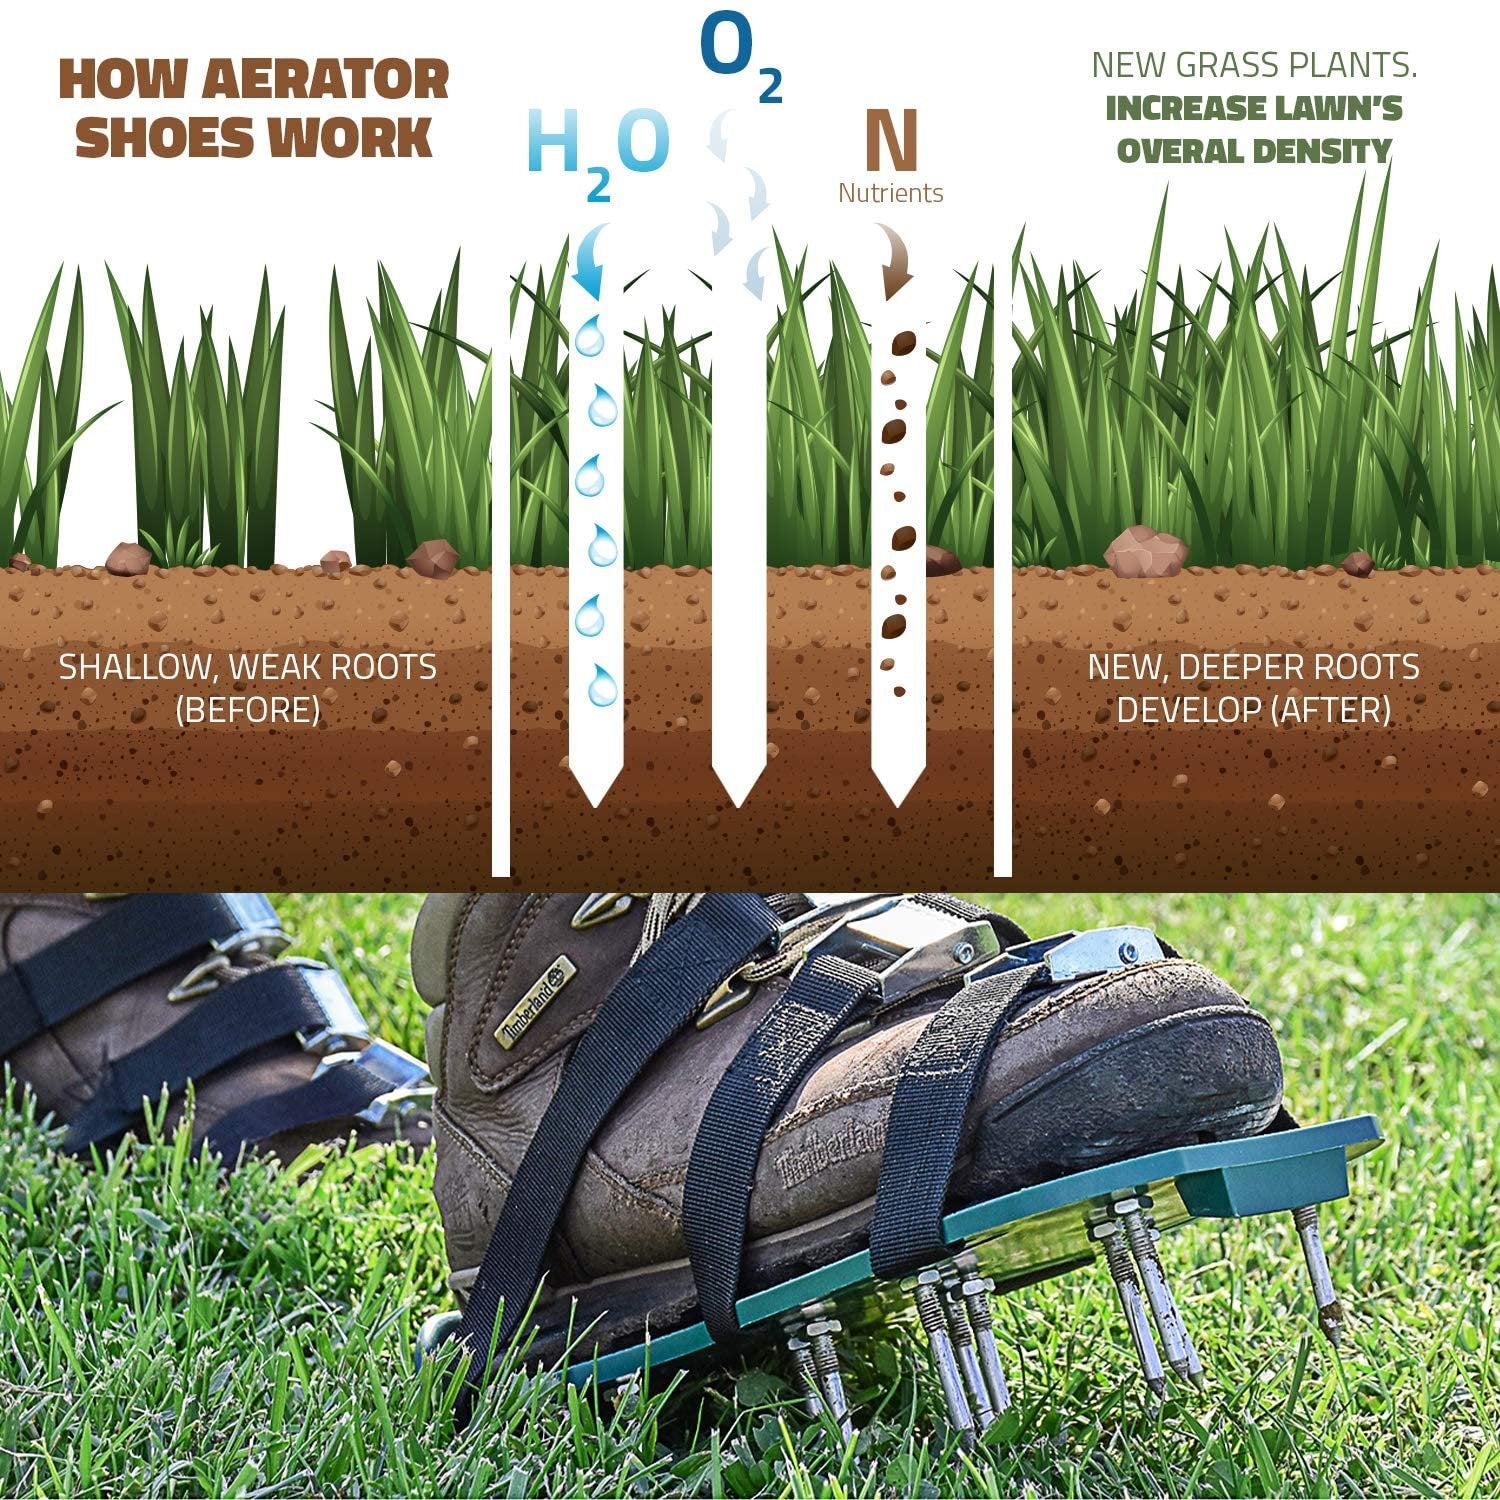 Abco Tech Lawn Aerator Shoes - for Aerating Lawn Soil - 3 Adjustable Straps and Heavy Duty Metal Buckles - One Size Fits All - Aerator Lawn Tool for Gardening, Lawn Care | Aeration Shoes for Lawn